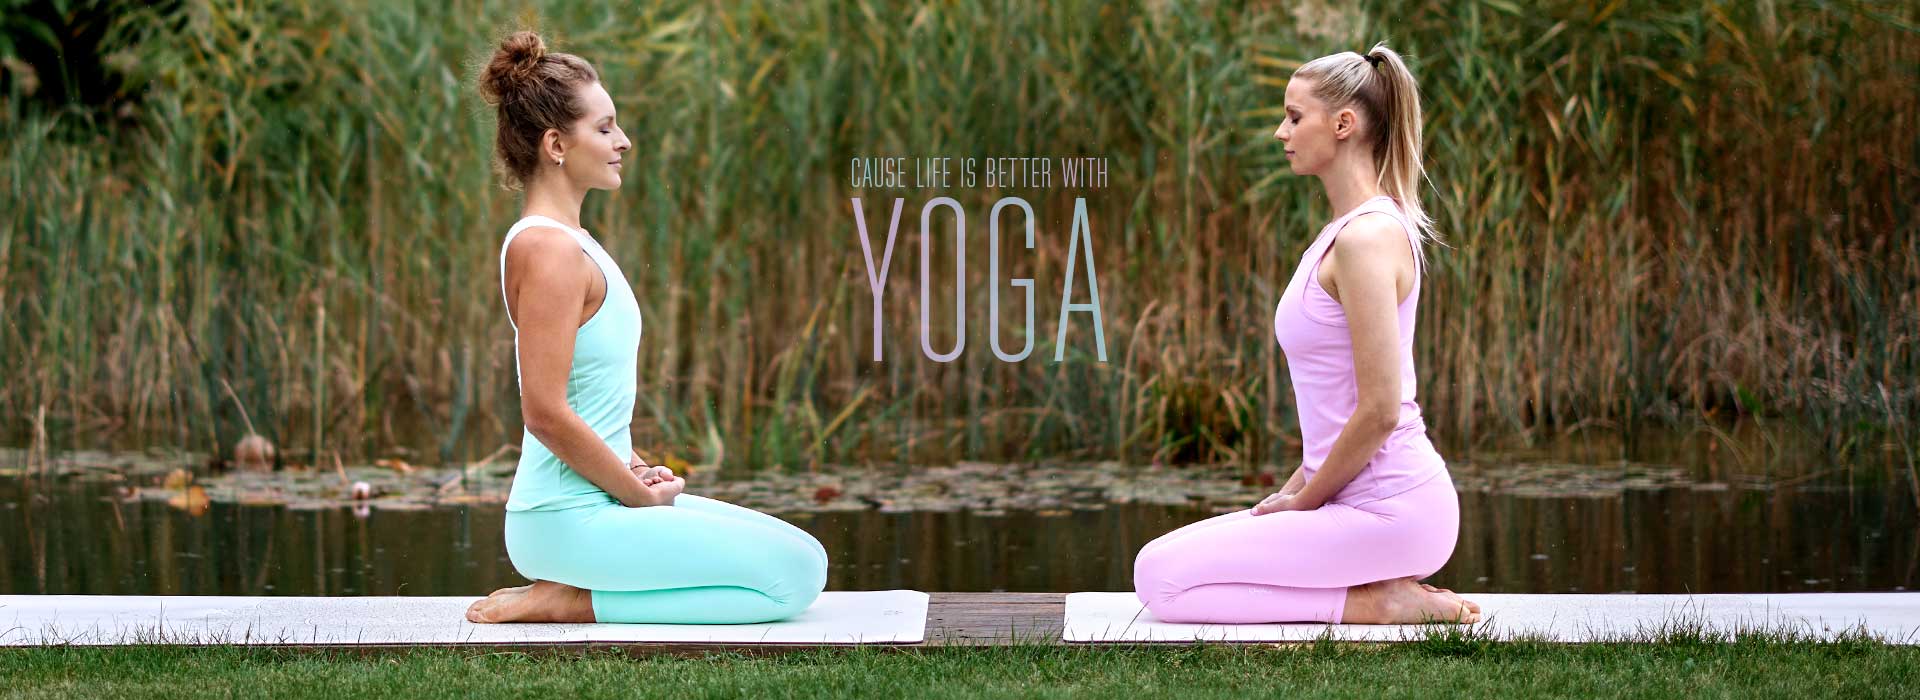 Cause Life is Better with Yoga